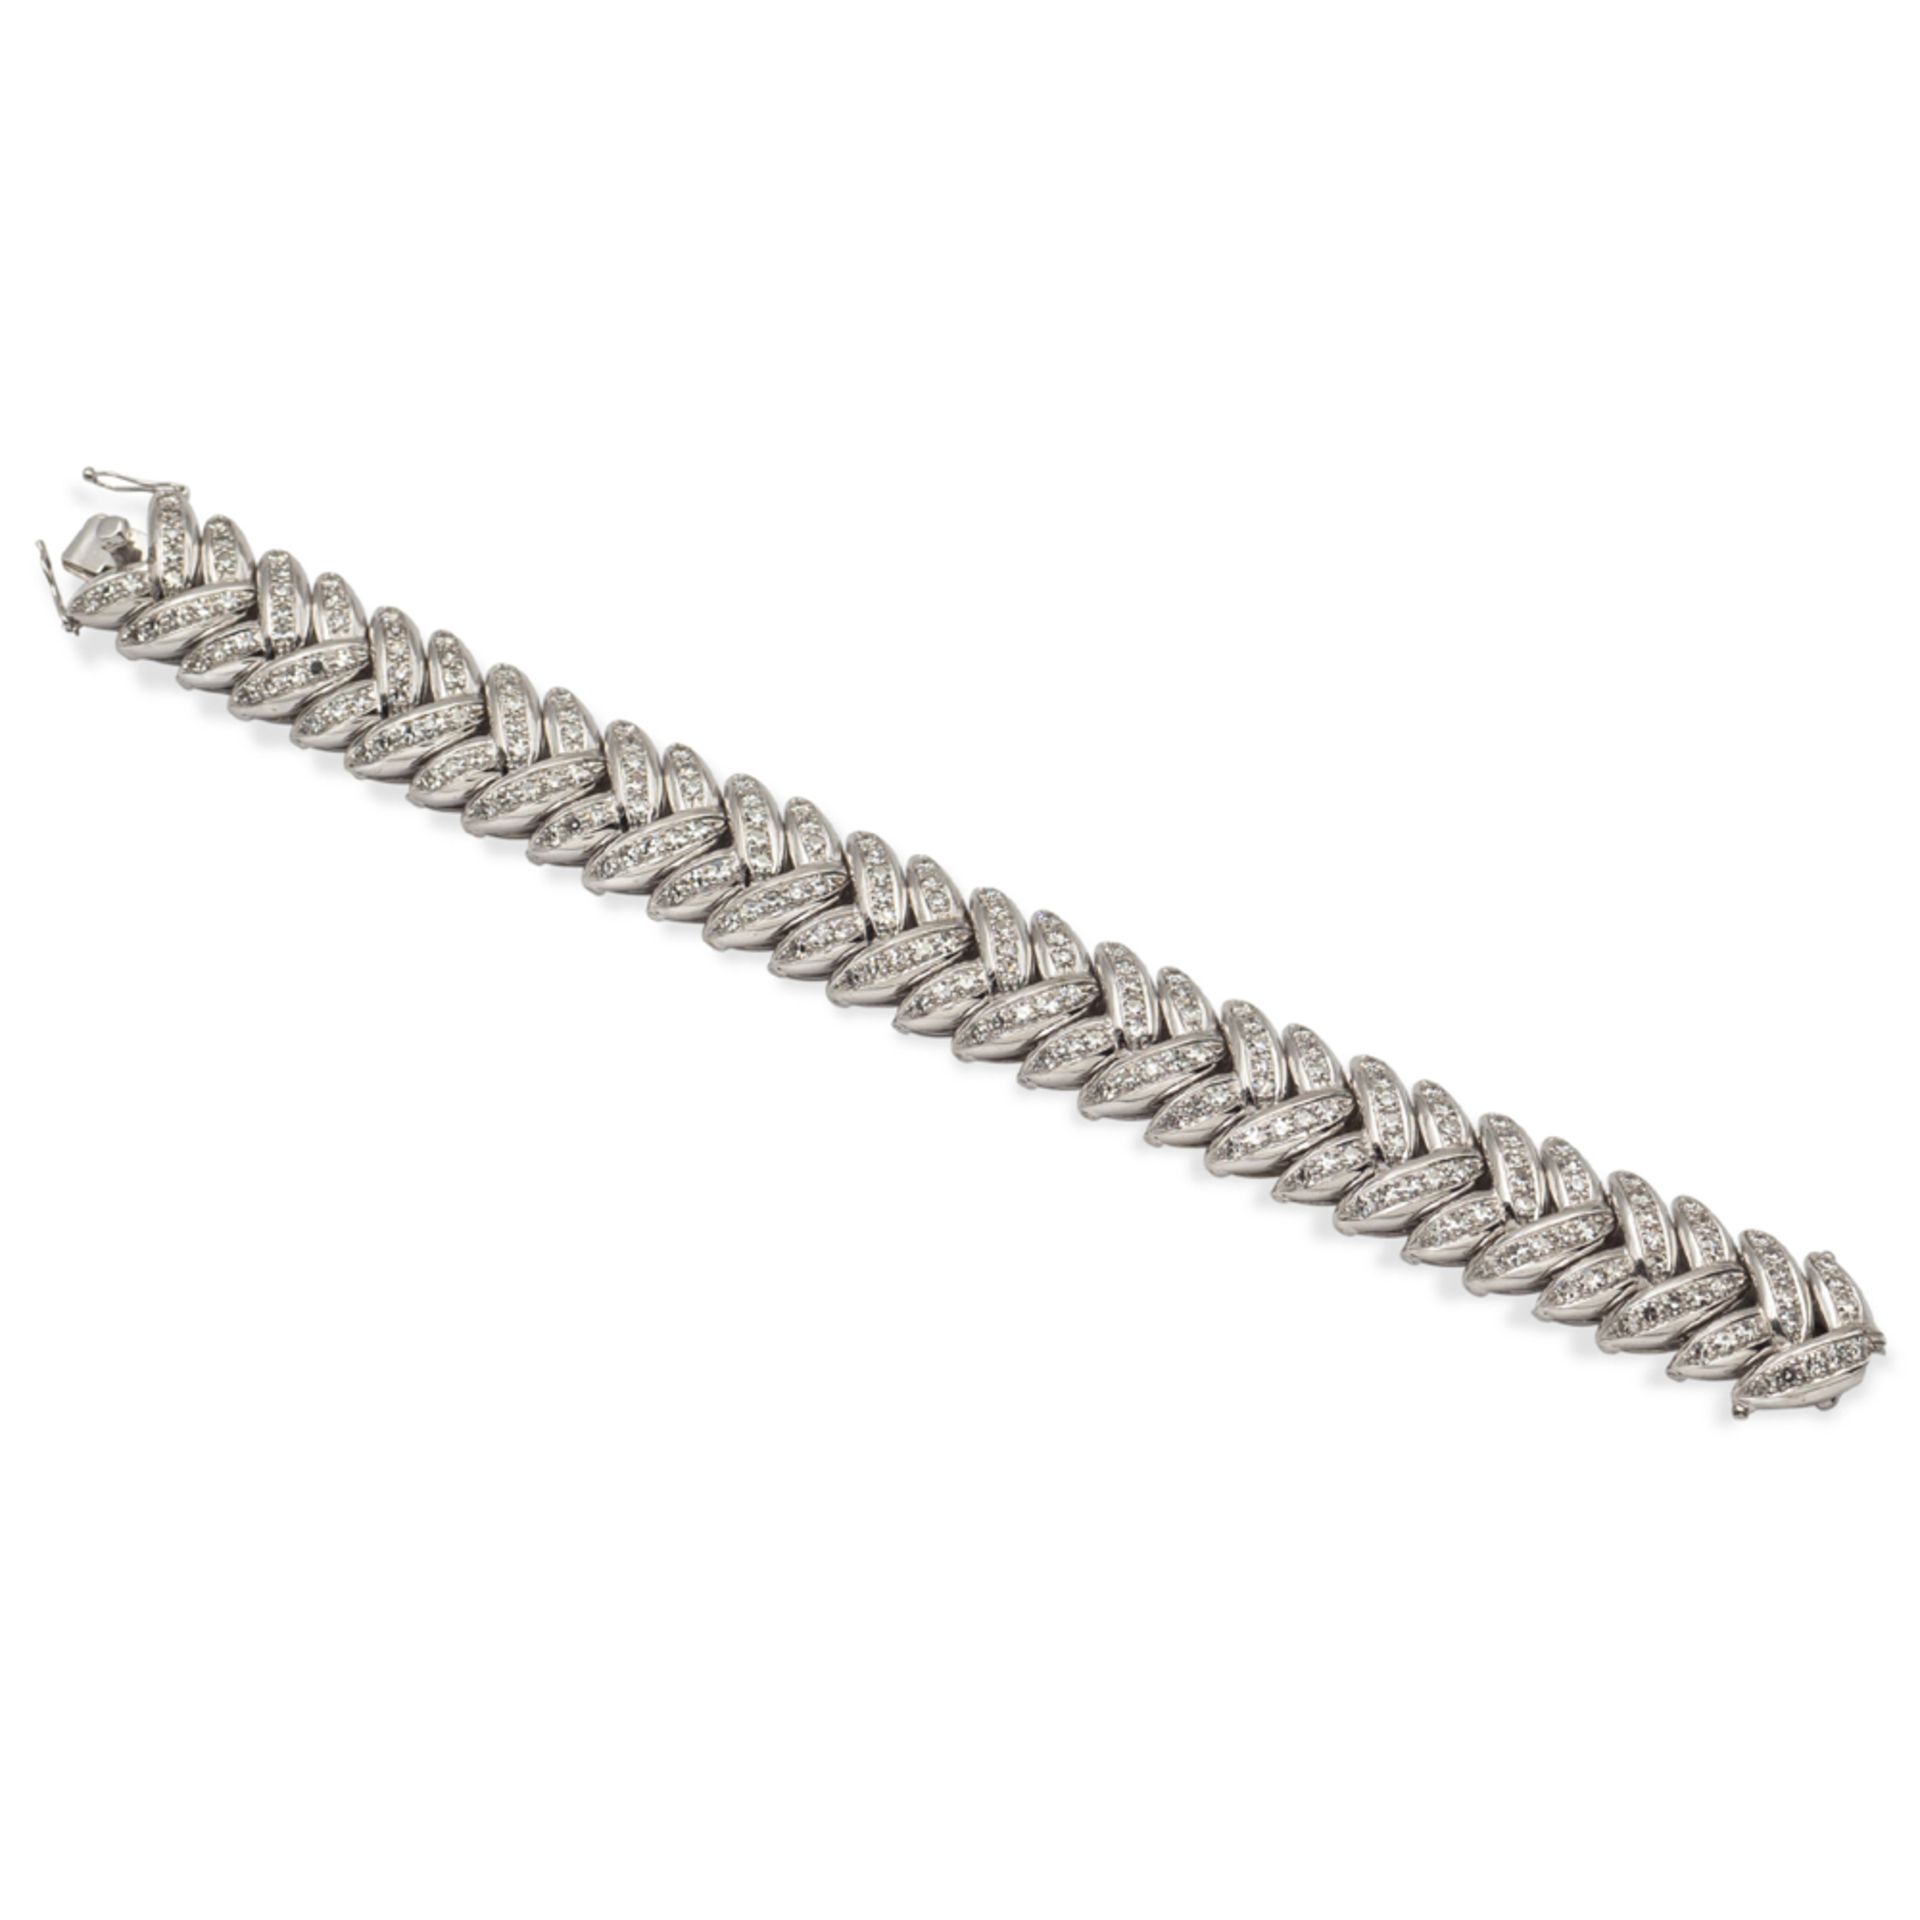 18kt white gold and diamond bracelet weight 80 gr. - Image 2 of 2